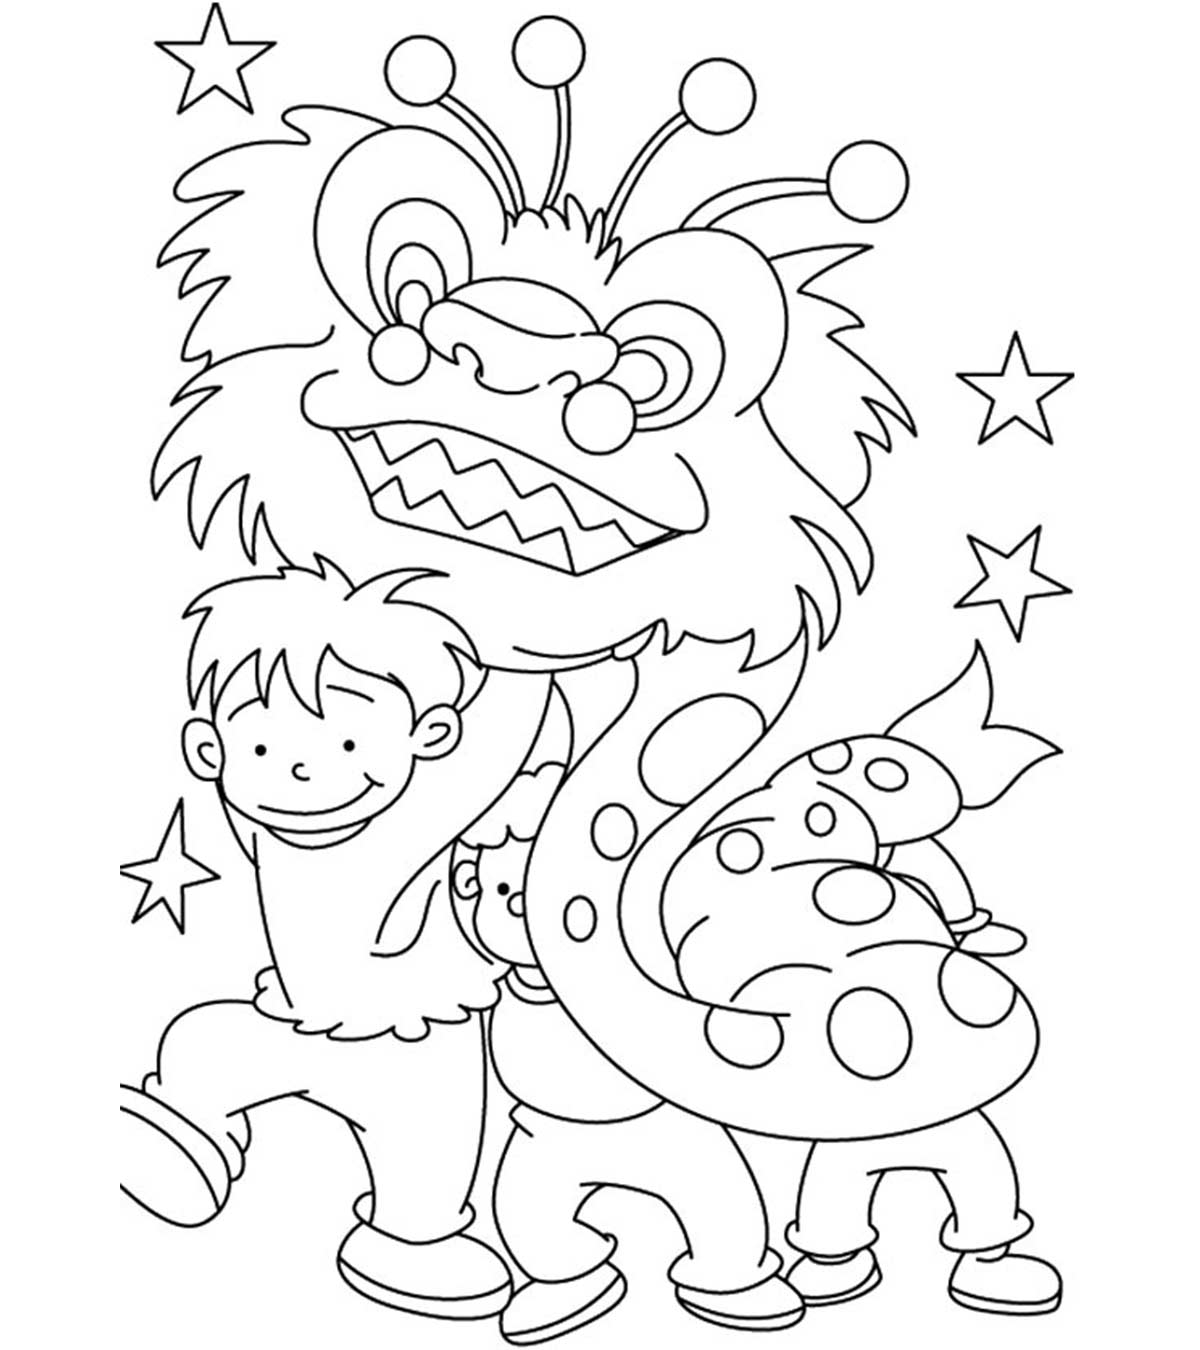 Coloring Book : Top Chinese New Year Coloring Page - Coloring Home